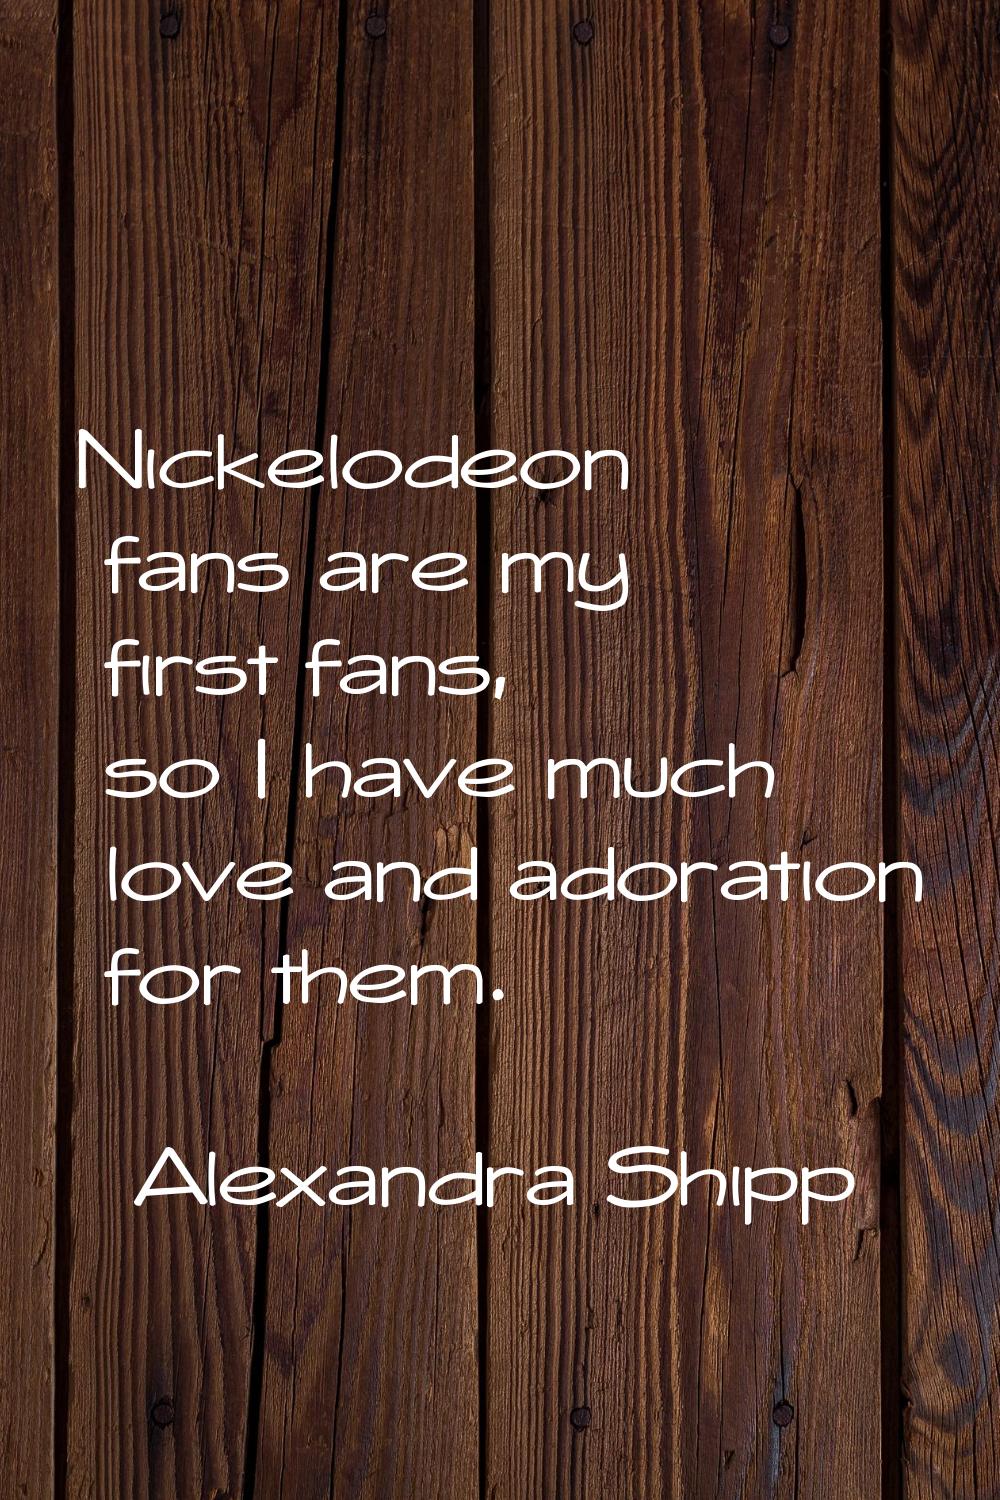 Nickelodeon fans are my first fans, so I have much love and adoration for them.